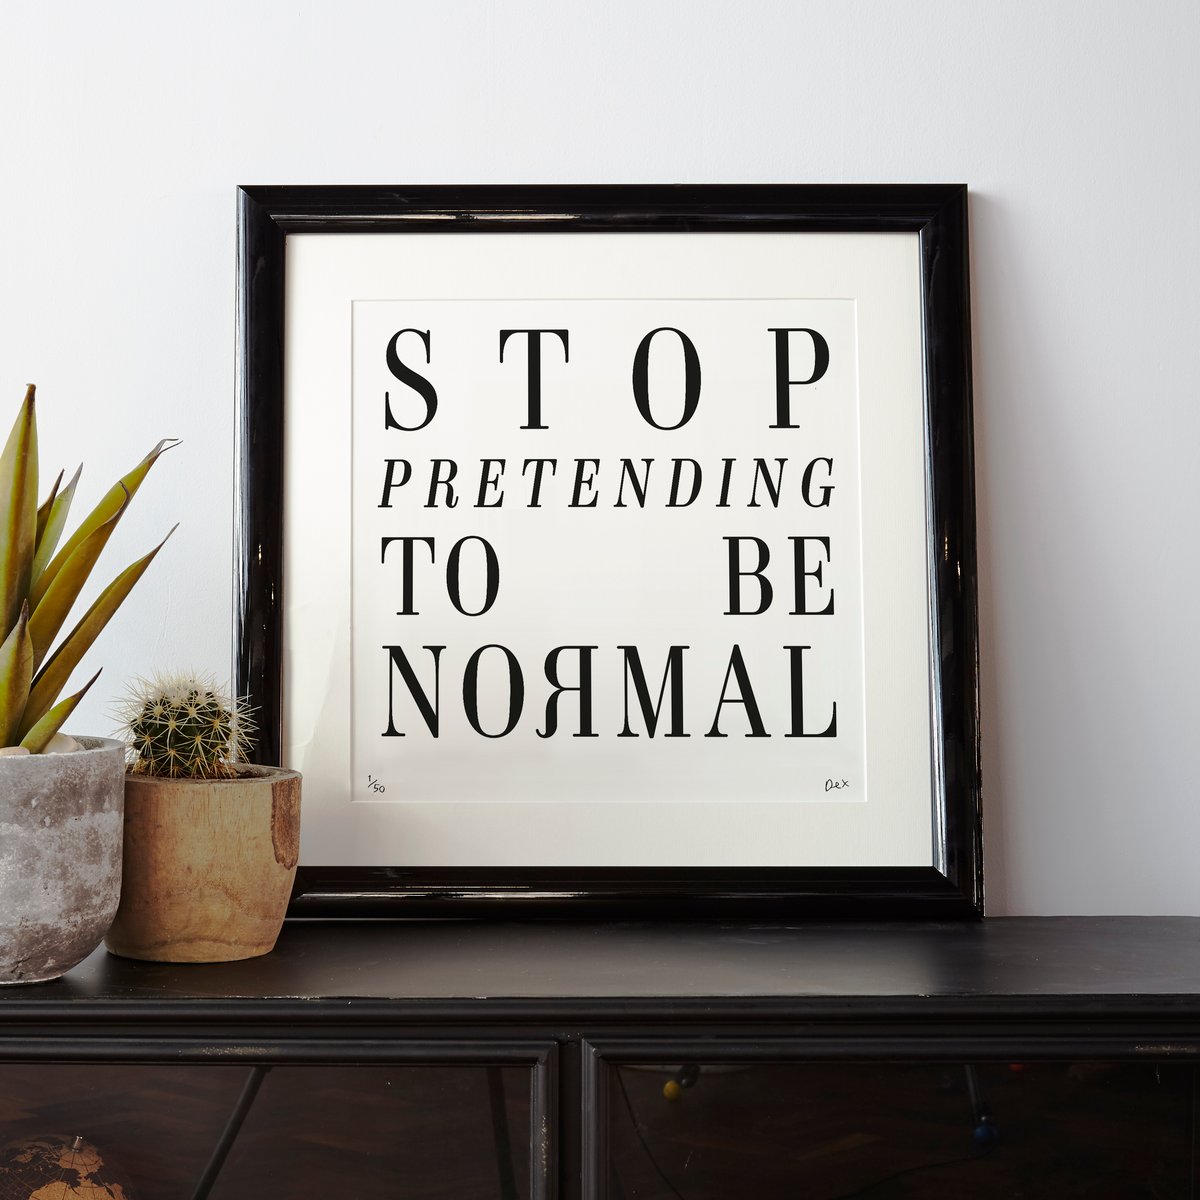 Life is the art of pretending to be normal.